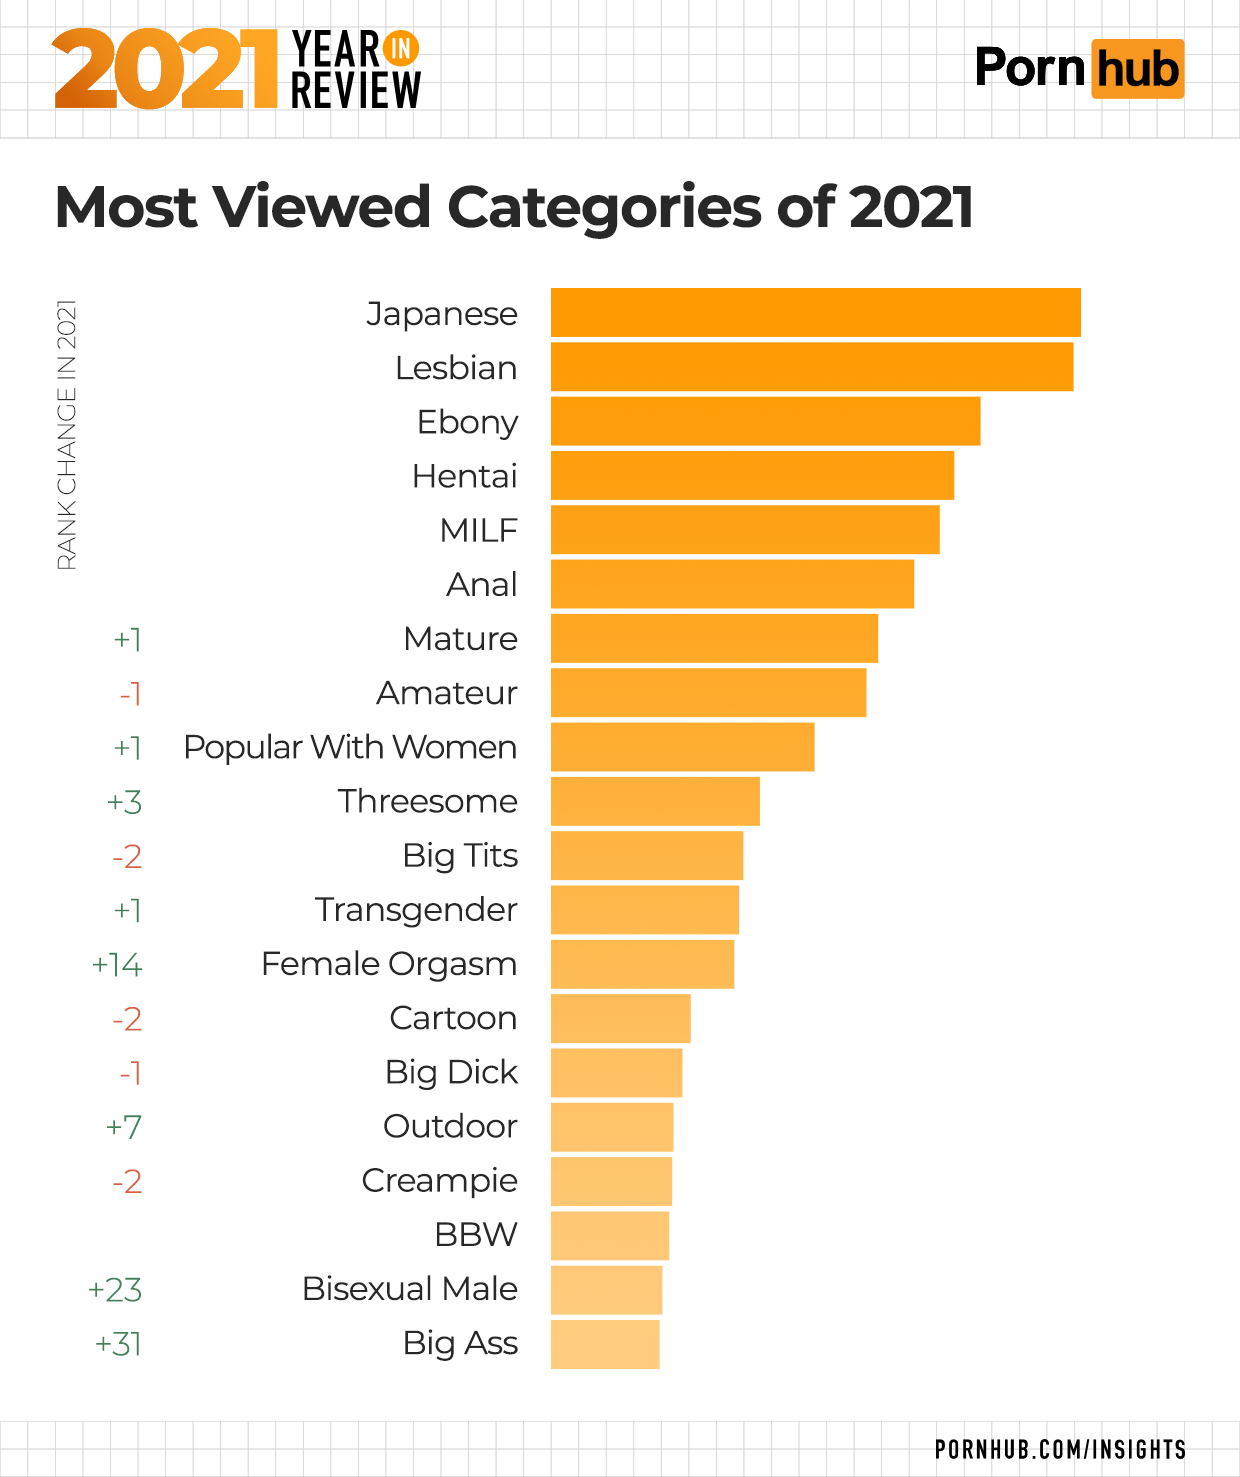 Different Categories Of Porn - 2021 Year in Review â€“ Pornhub Insights